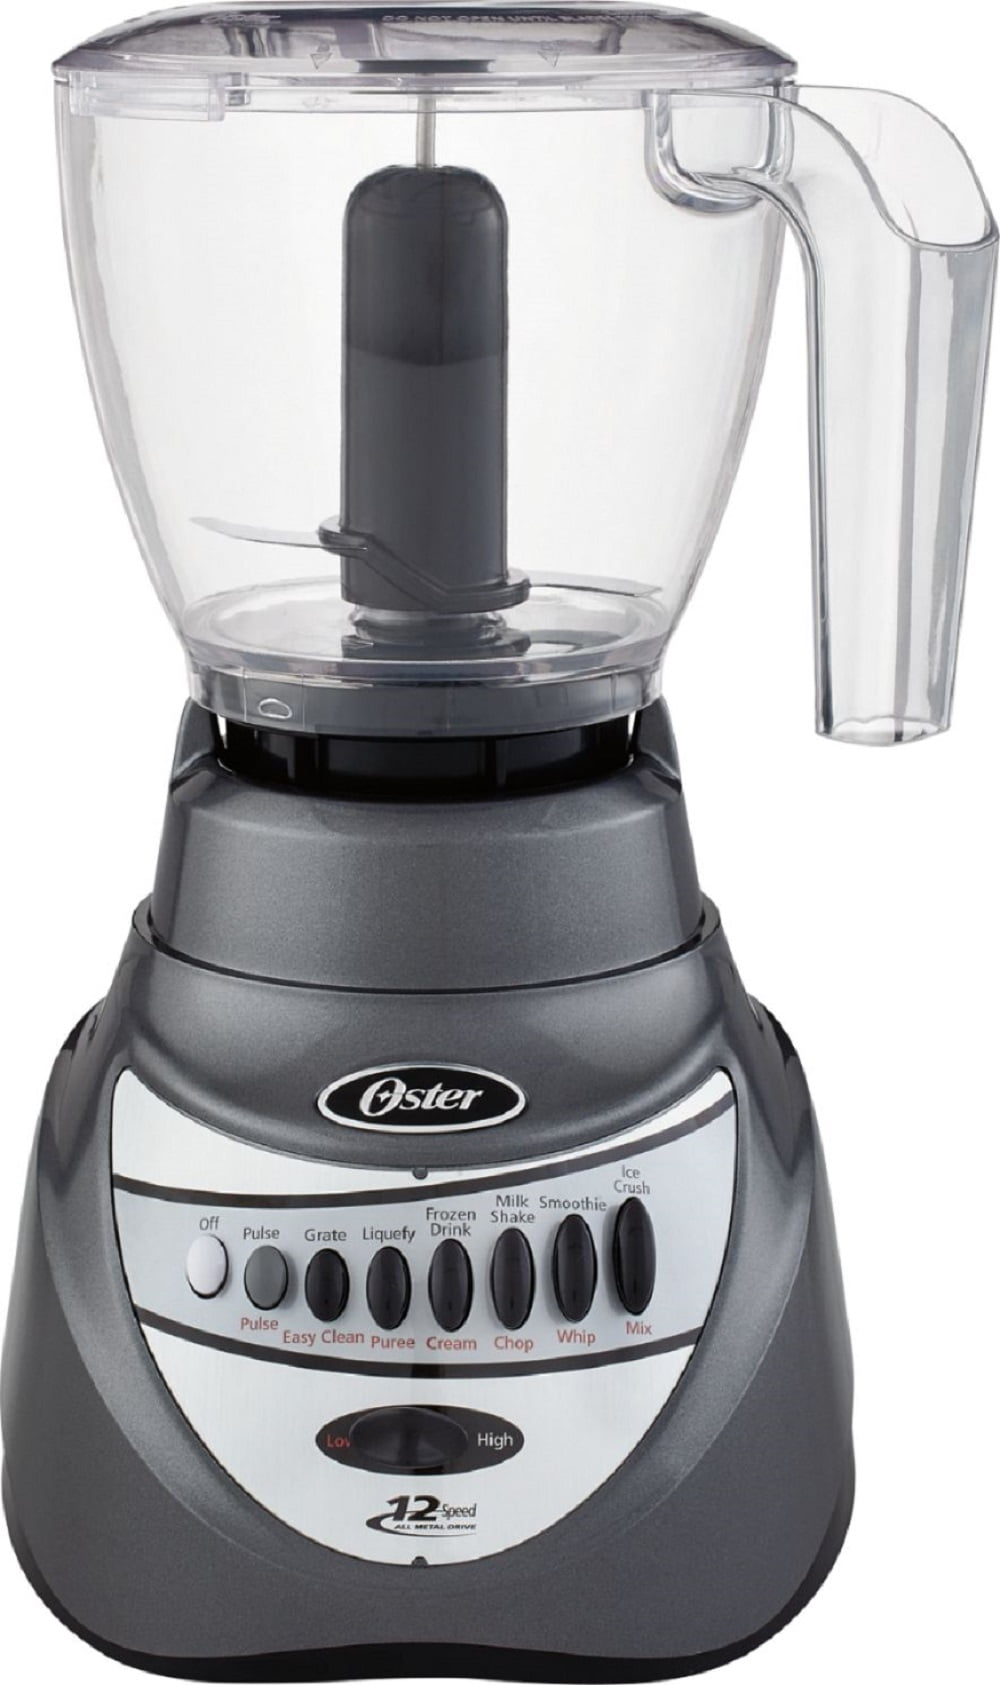 Oster Hand Blender with Chopping Attachment & Cup at